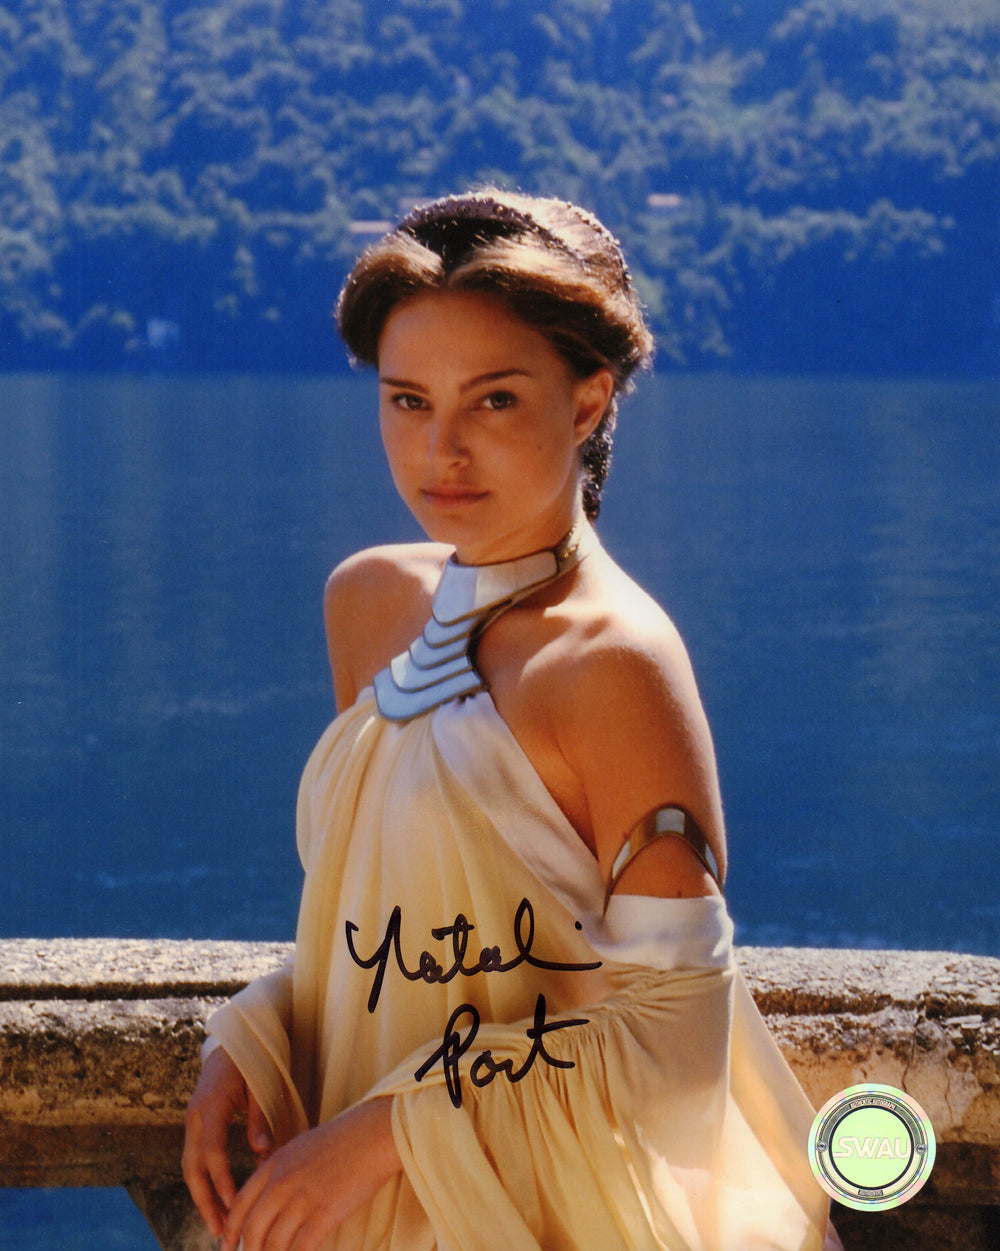 Natalie Portman as Padme Amidala from Star Wars Episode II: Attack of the Clones (SWAU) Signed 8x10 Photo